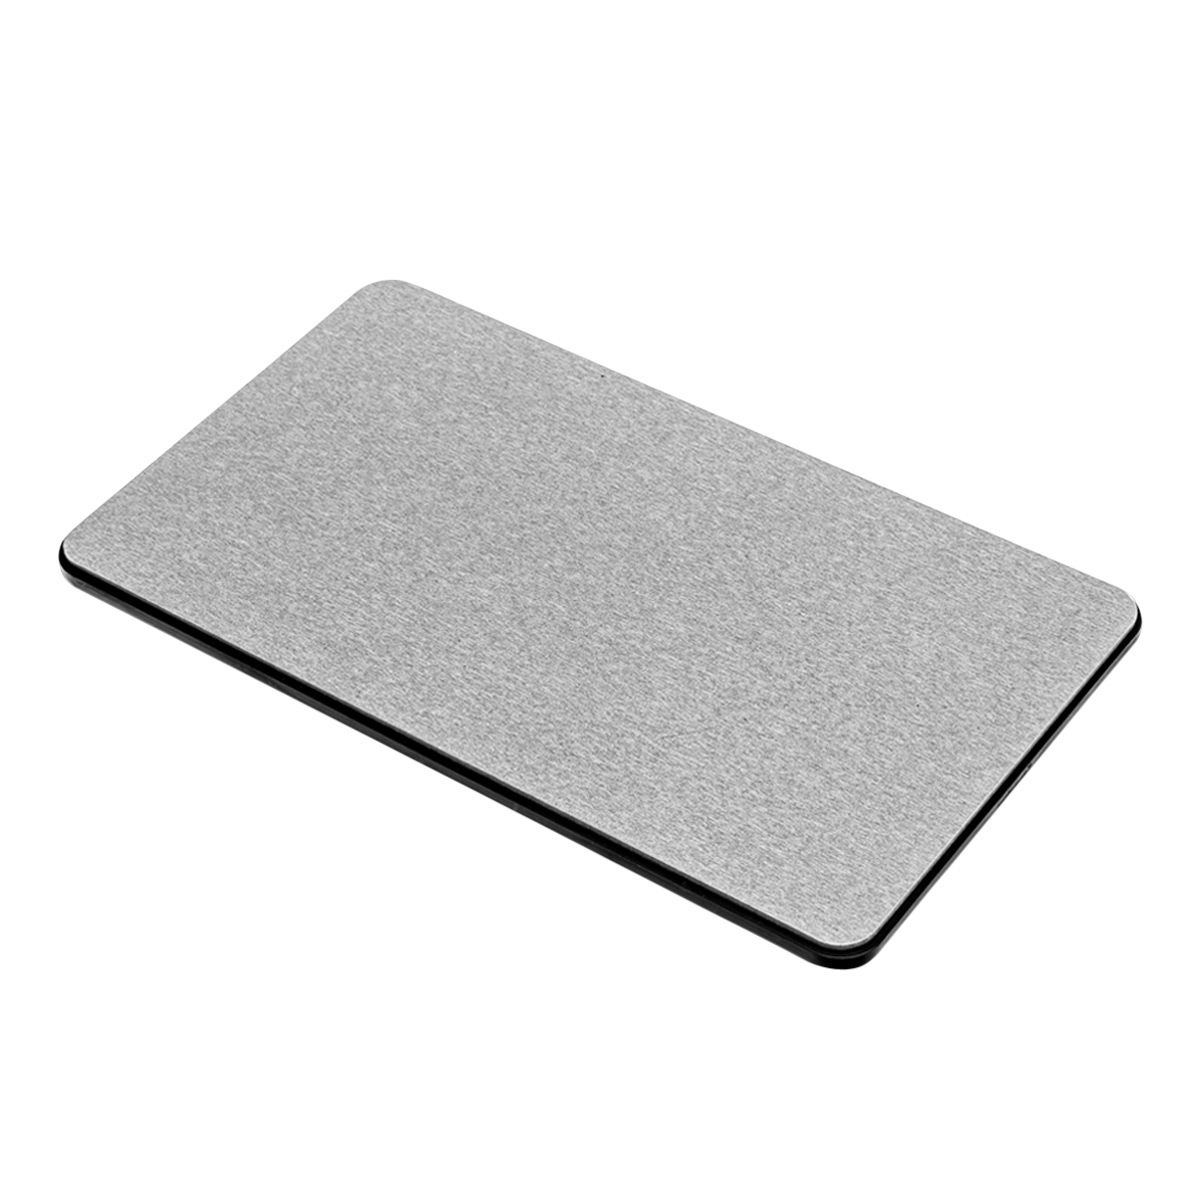 https://www.containerstore.com/catalogimages/440440/10086497-madesmart-Drying-StoneDish-.jpg